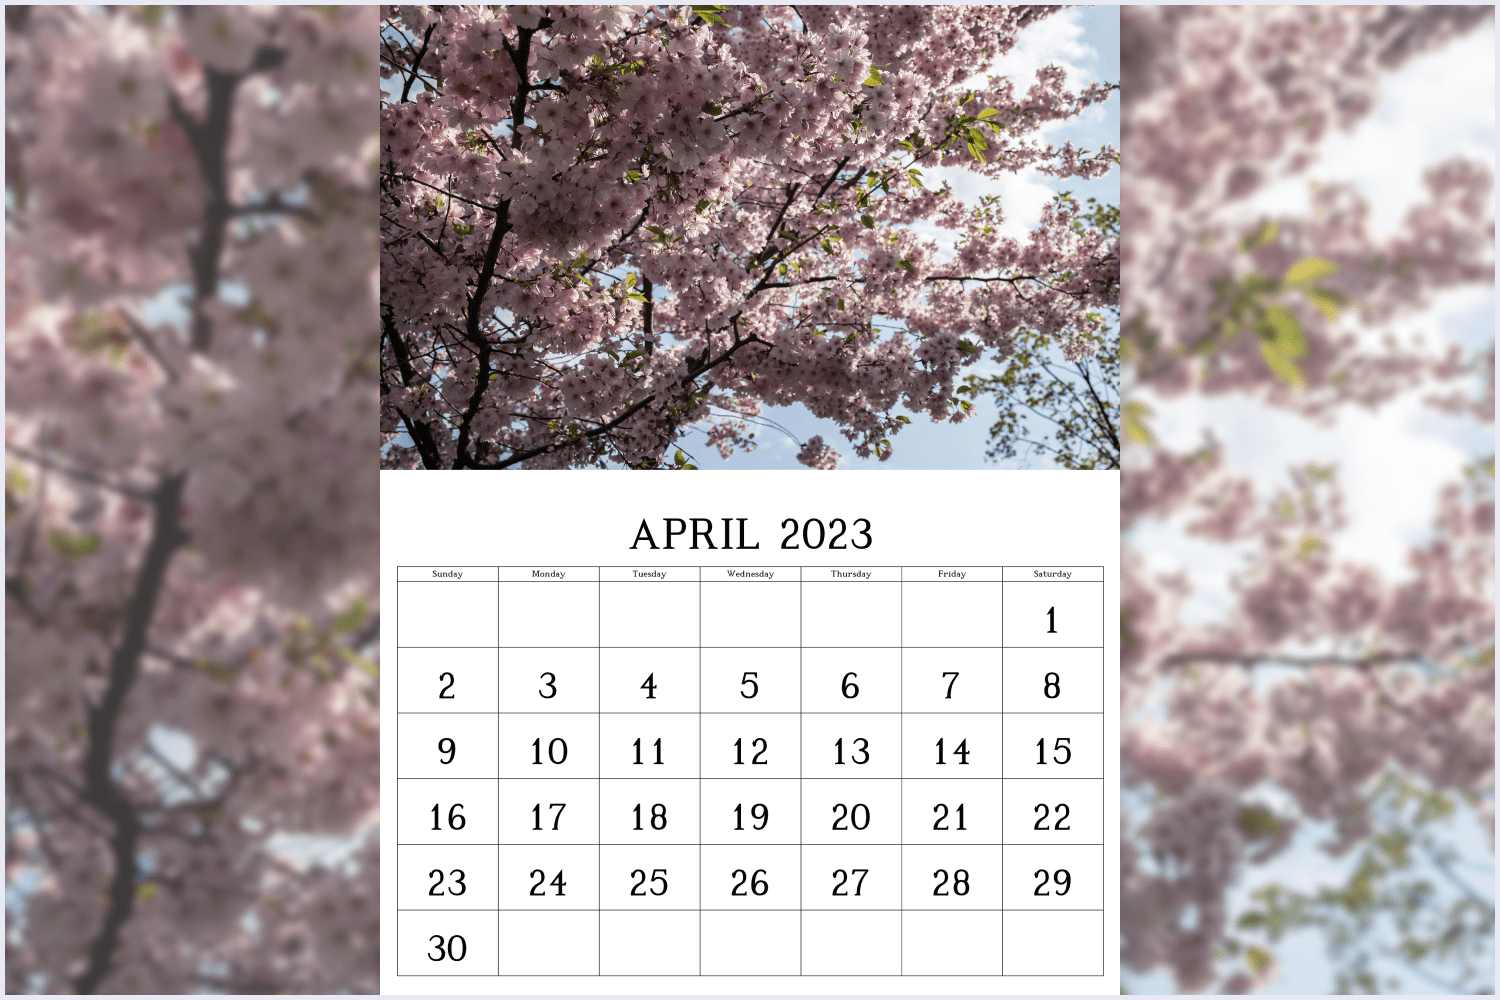 Calendar for April 2023 with a photograph of a flowering tree.